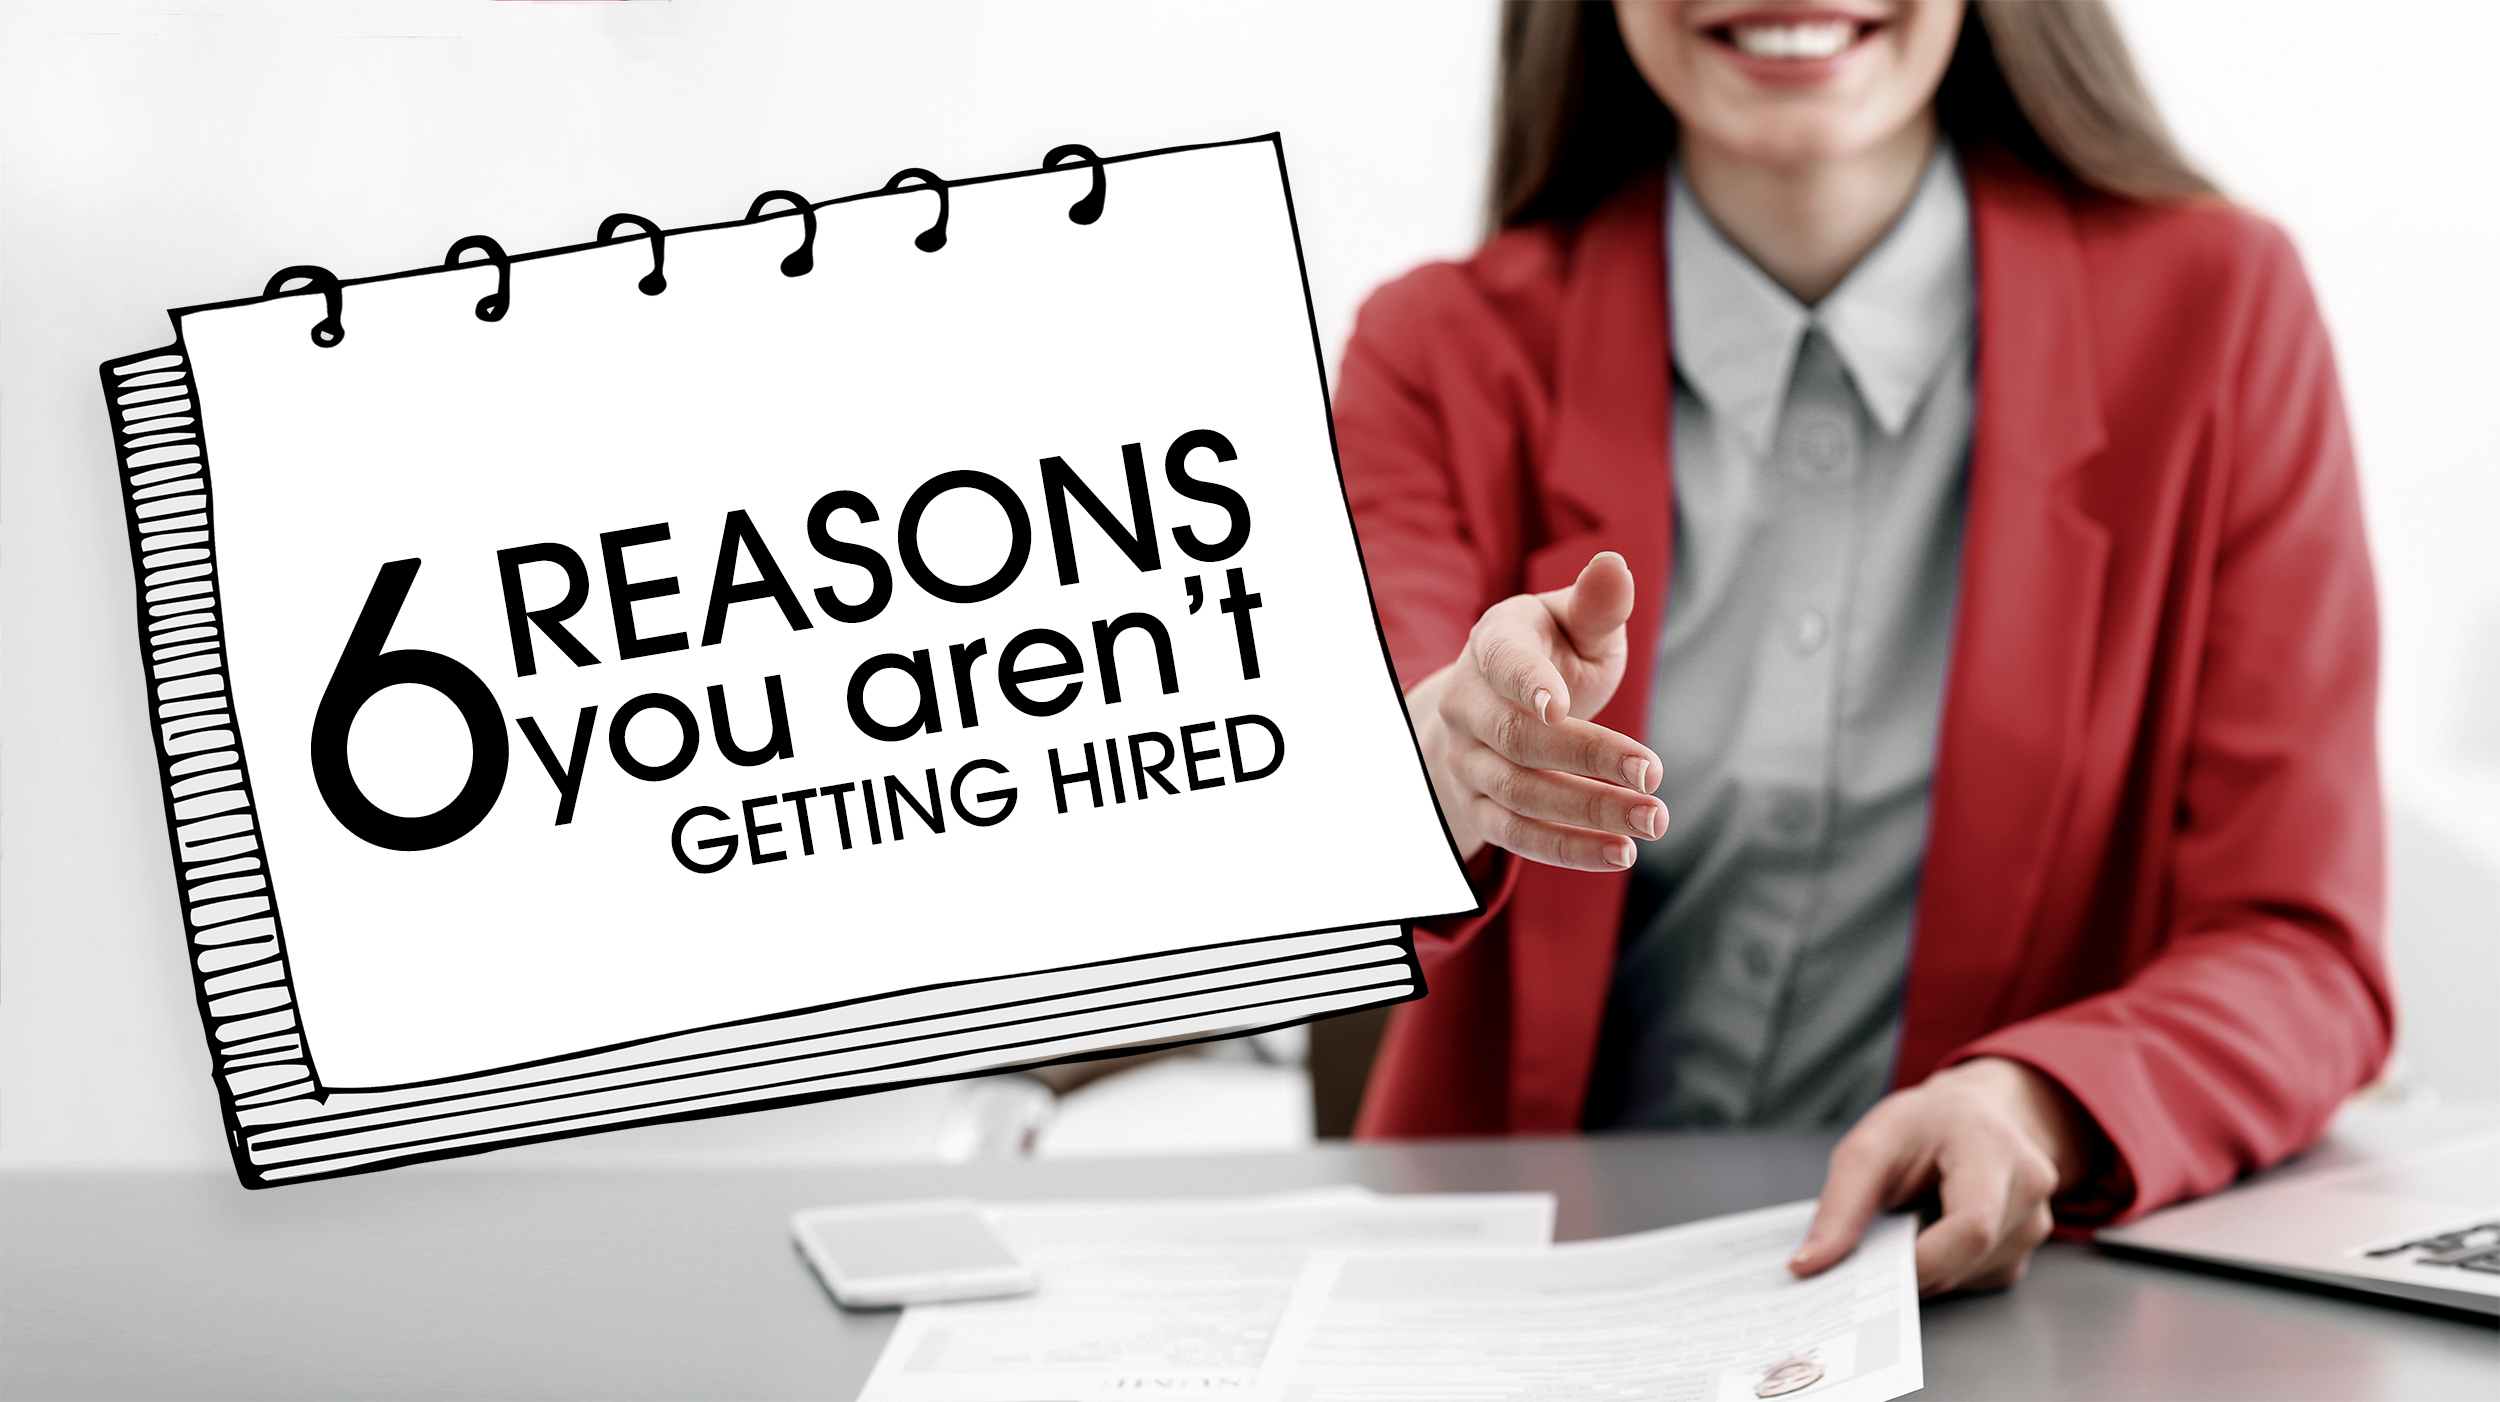 6 reasons you aren’t getting hired a real life case study. (you WON’T